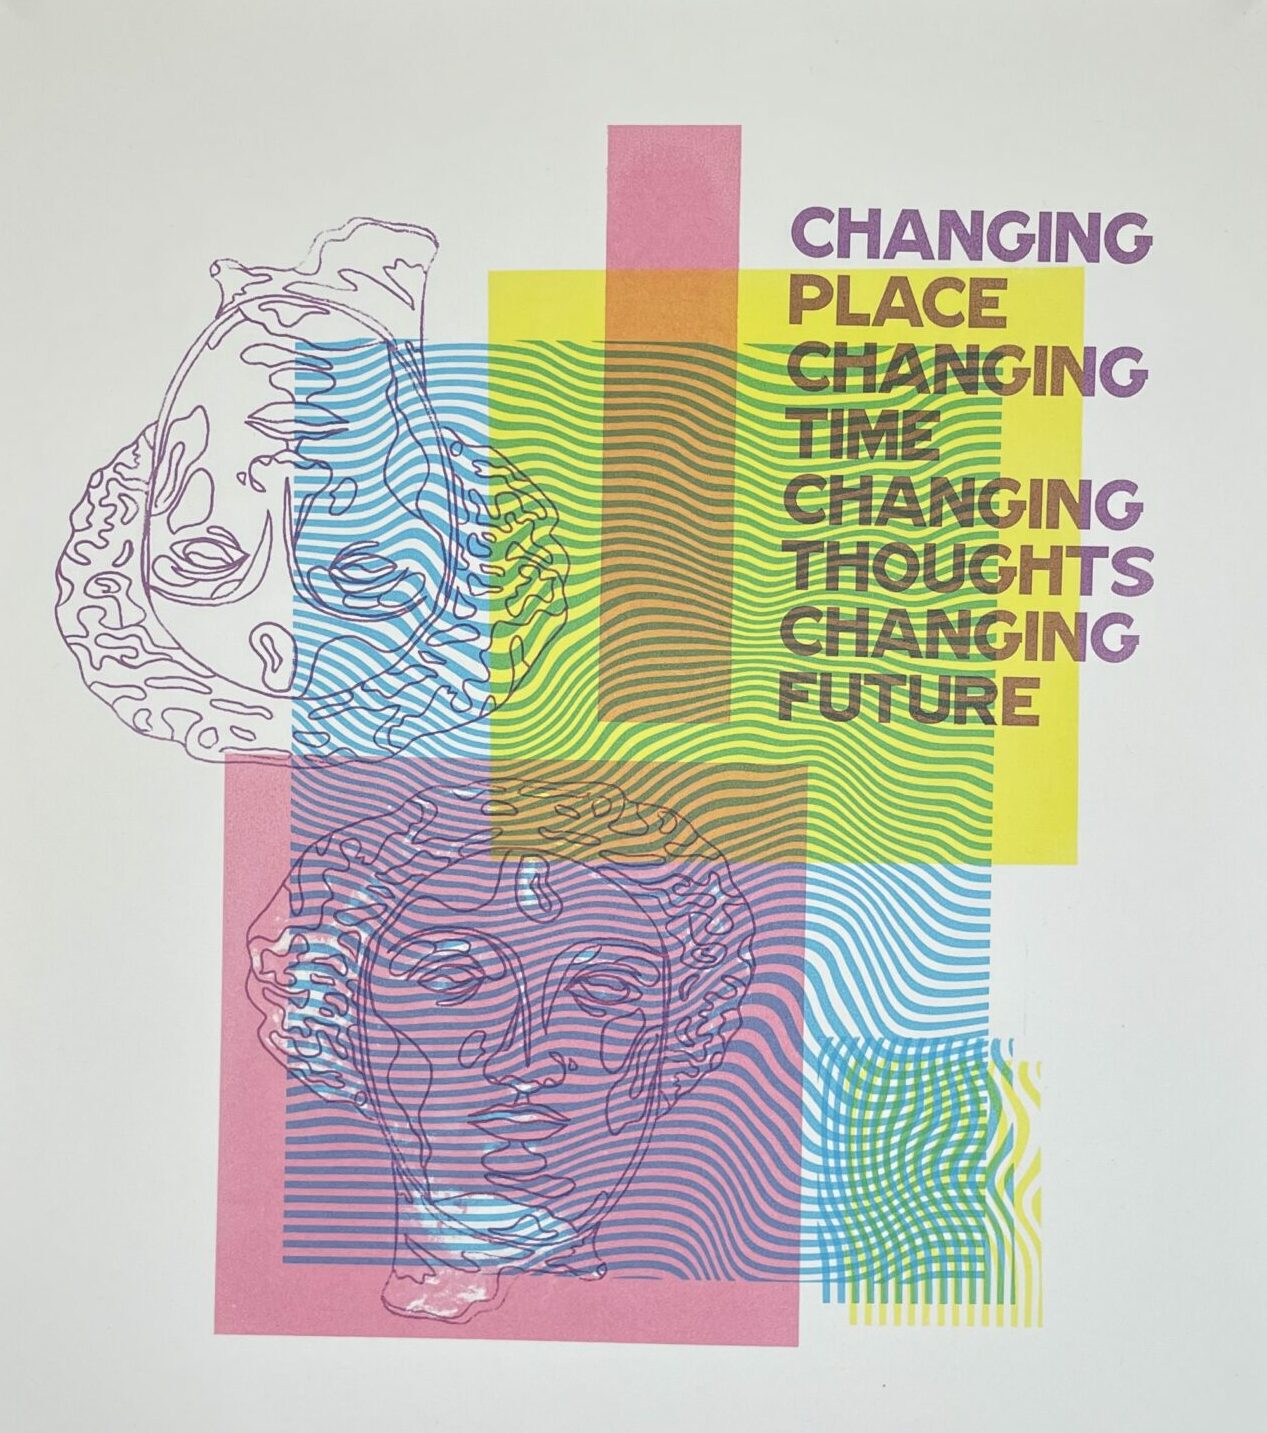 A colourful silkscreen with pink, blue, yellow squares and squiggly lines with the text “Changing place, changing time, changing thoughts, changing future”